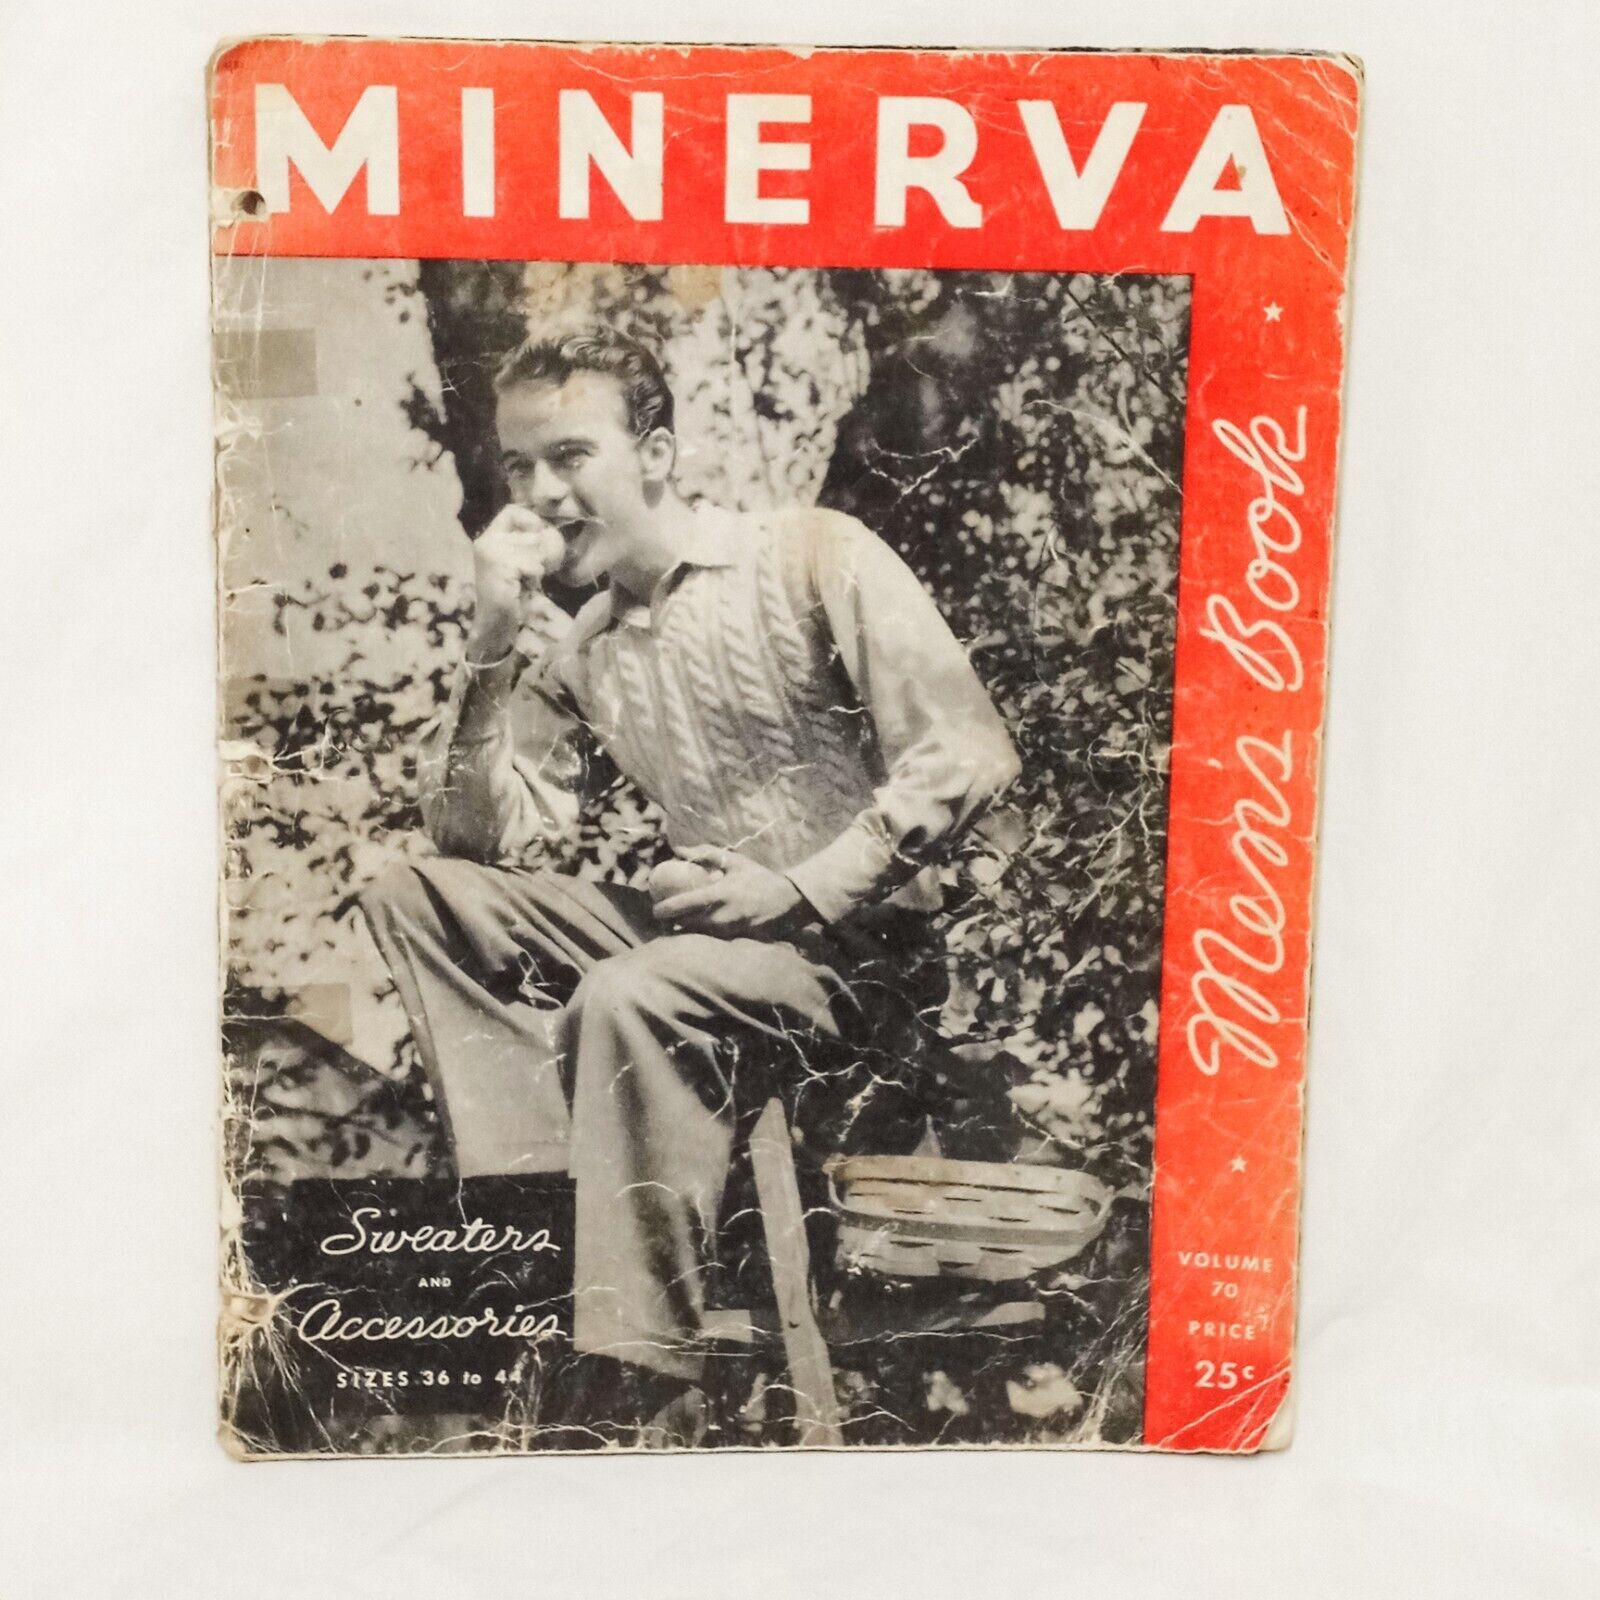 Minerva Men's Sweaters Accessories Knitting Pattern Book Sizes 36 to 44    1946 - $18.99